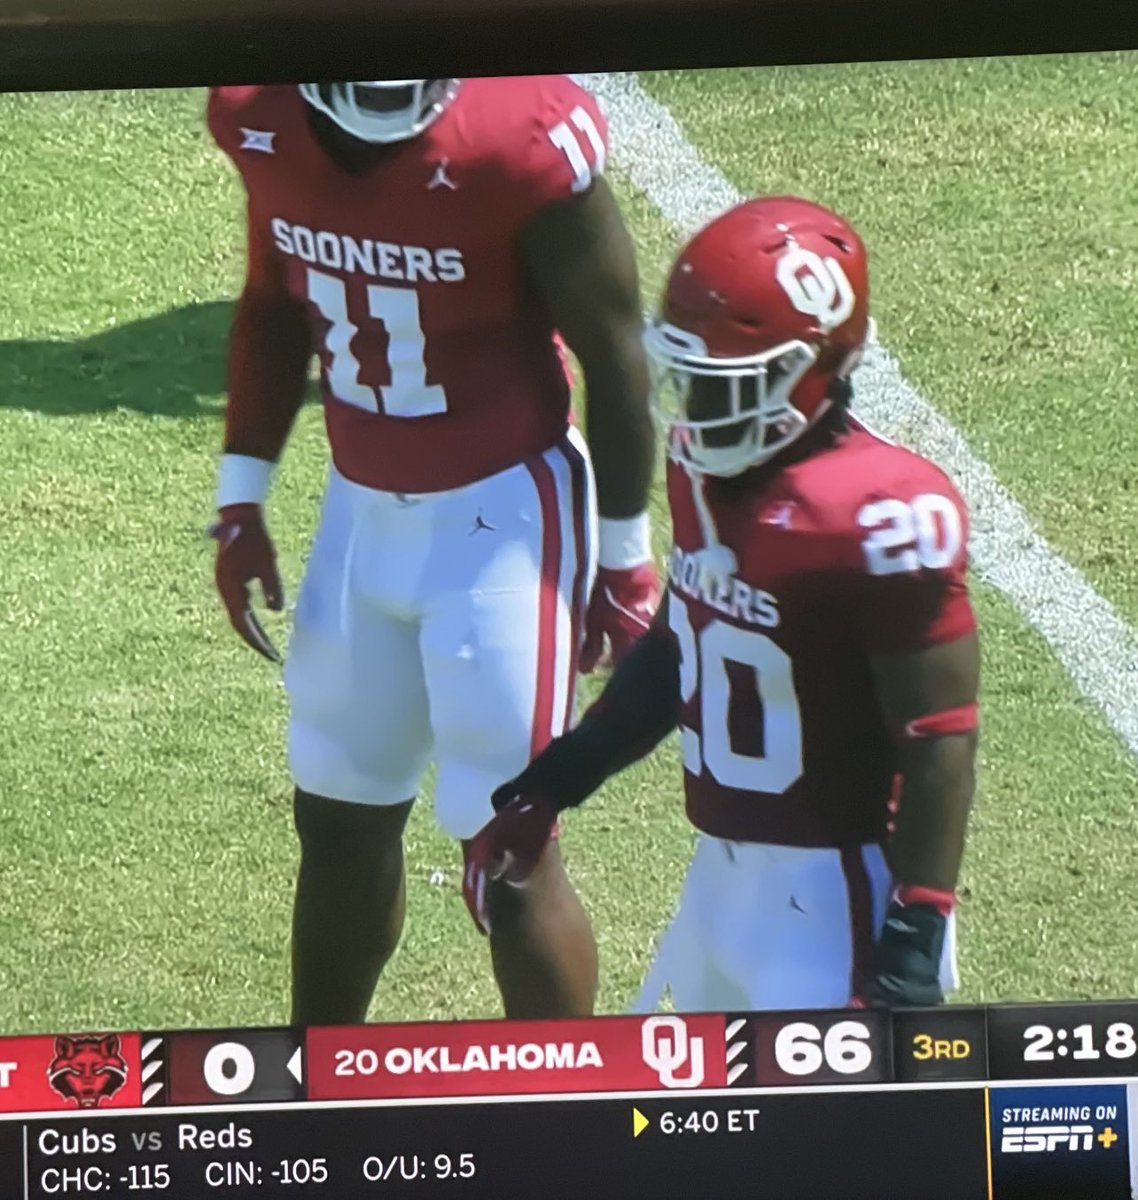 Former Tampa Catholic Crusader @TC_Football @LewisCarter_4 saw action today in his first college football game! #TampaCatholicFootball #BoomerSooner